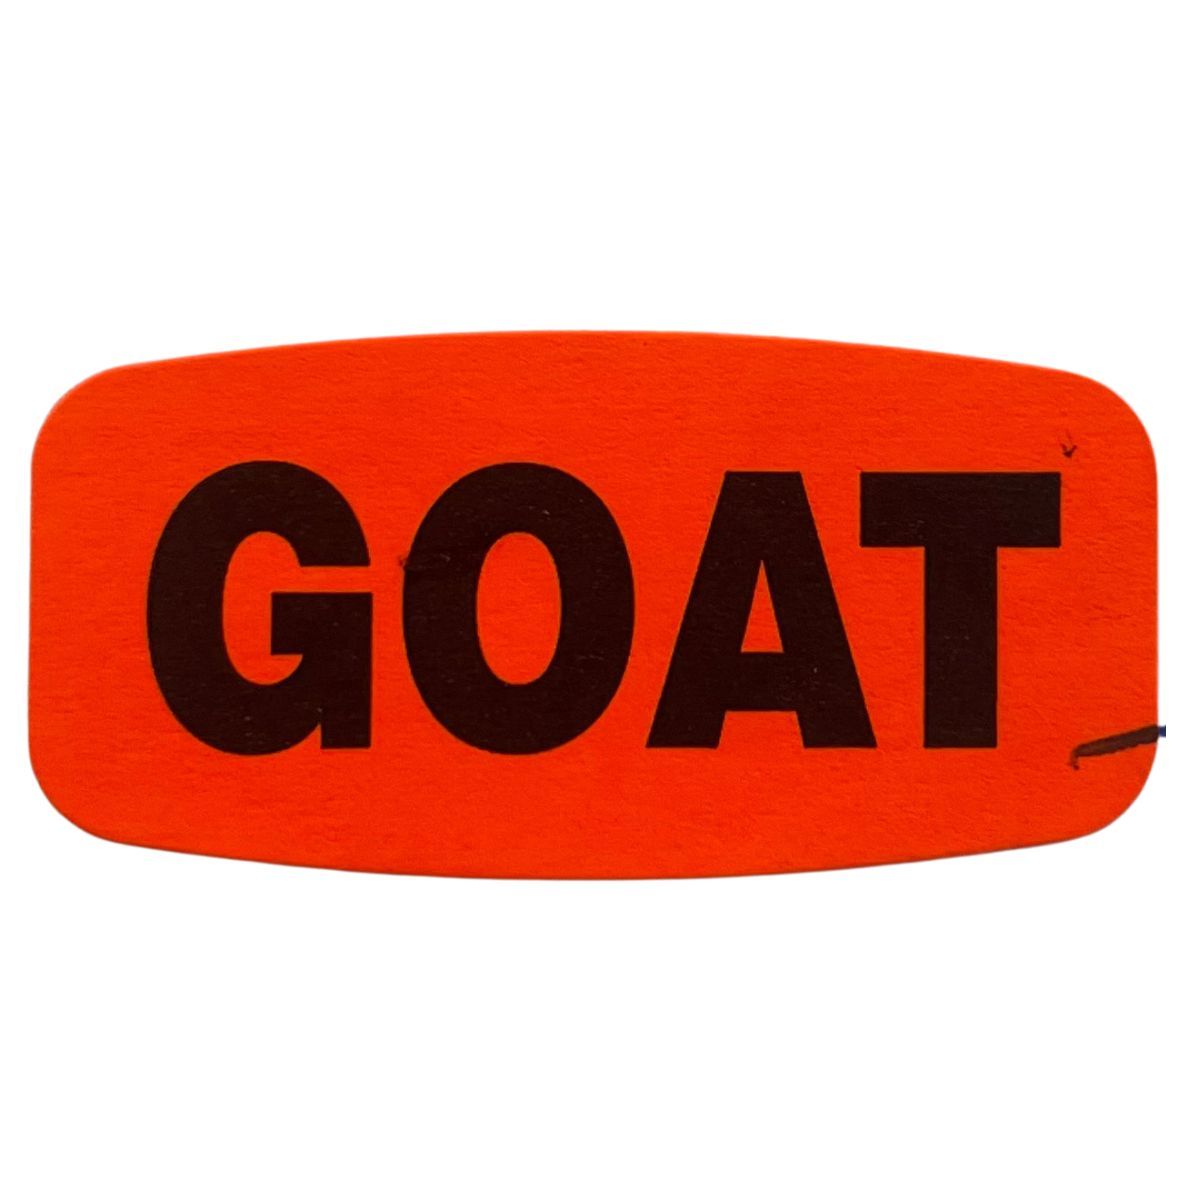 Bollin Label 120269 - Goat Labels Red Rectangle - Roll of 1000